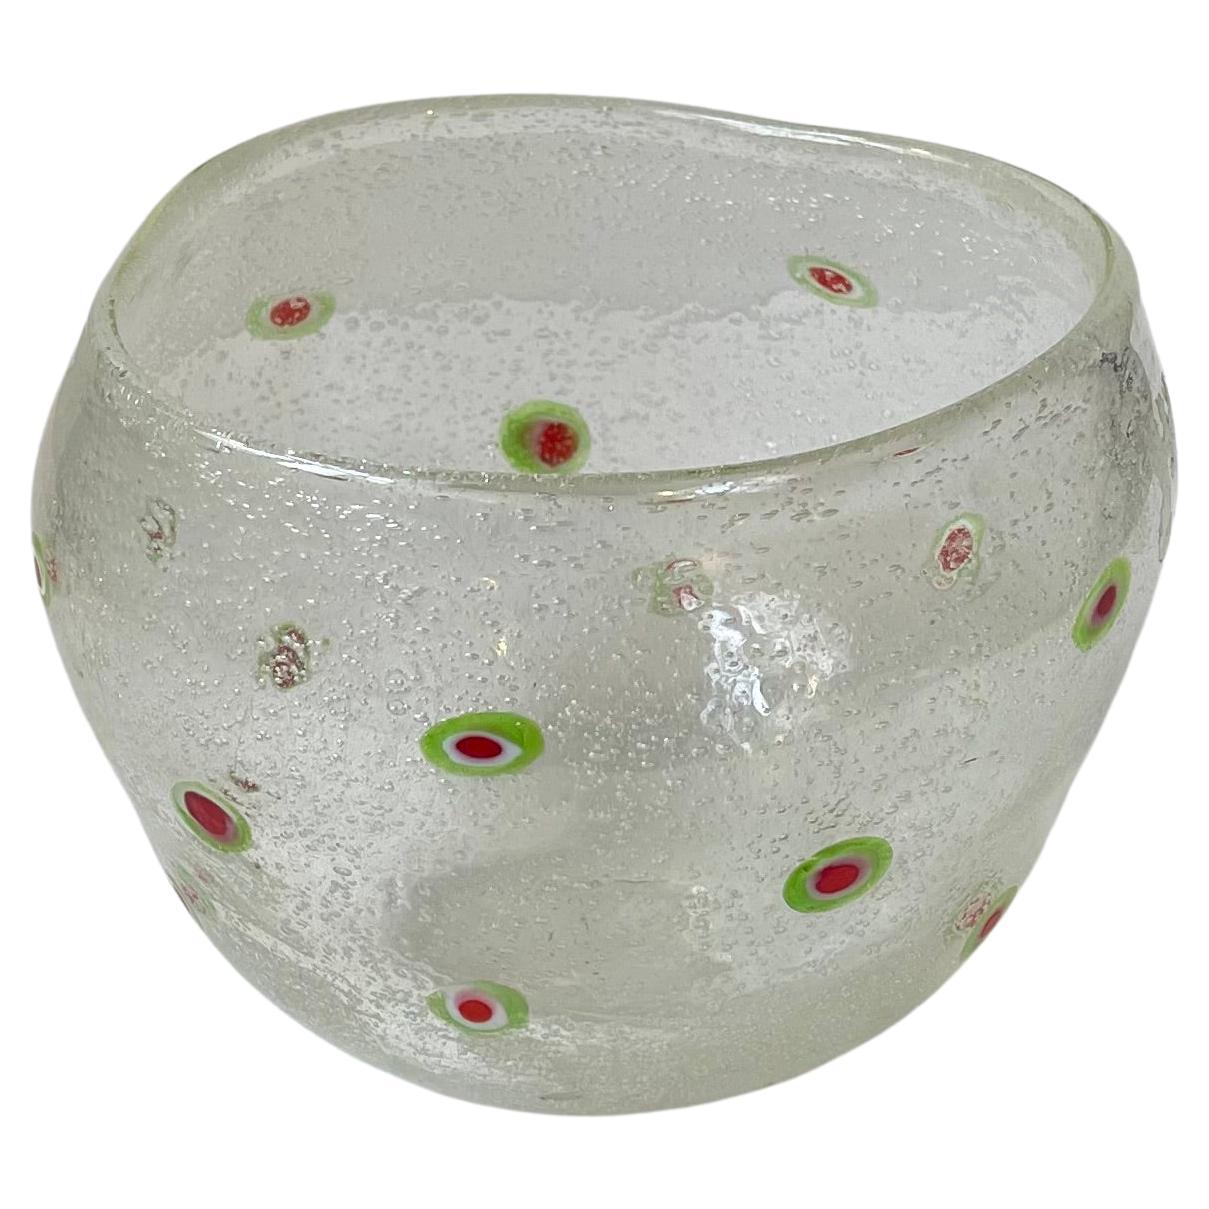 Hand-Blown Italian Art Glass Bowl with Air Bubbles & Flowers, 1960s For Sale